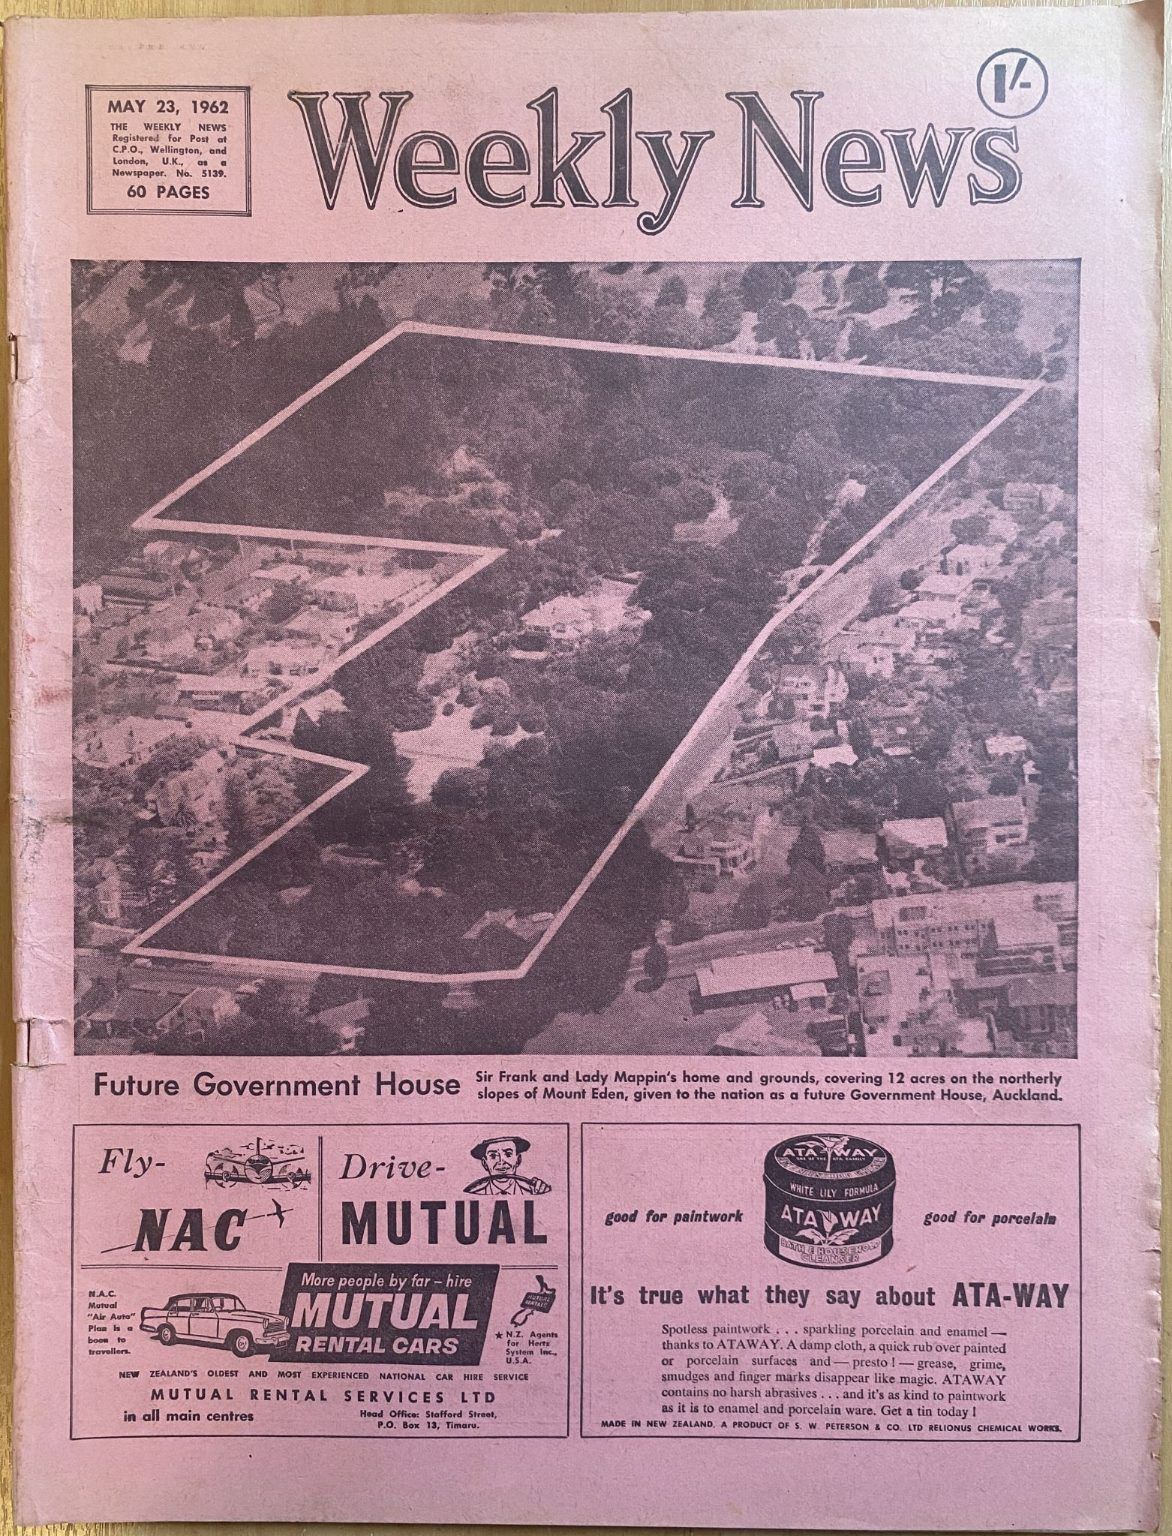 OLD NEWSPAPER: The Weekly News, No. 5139, 23 May 1962